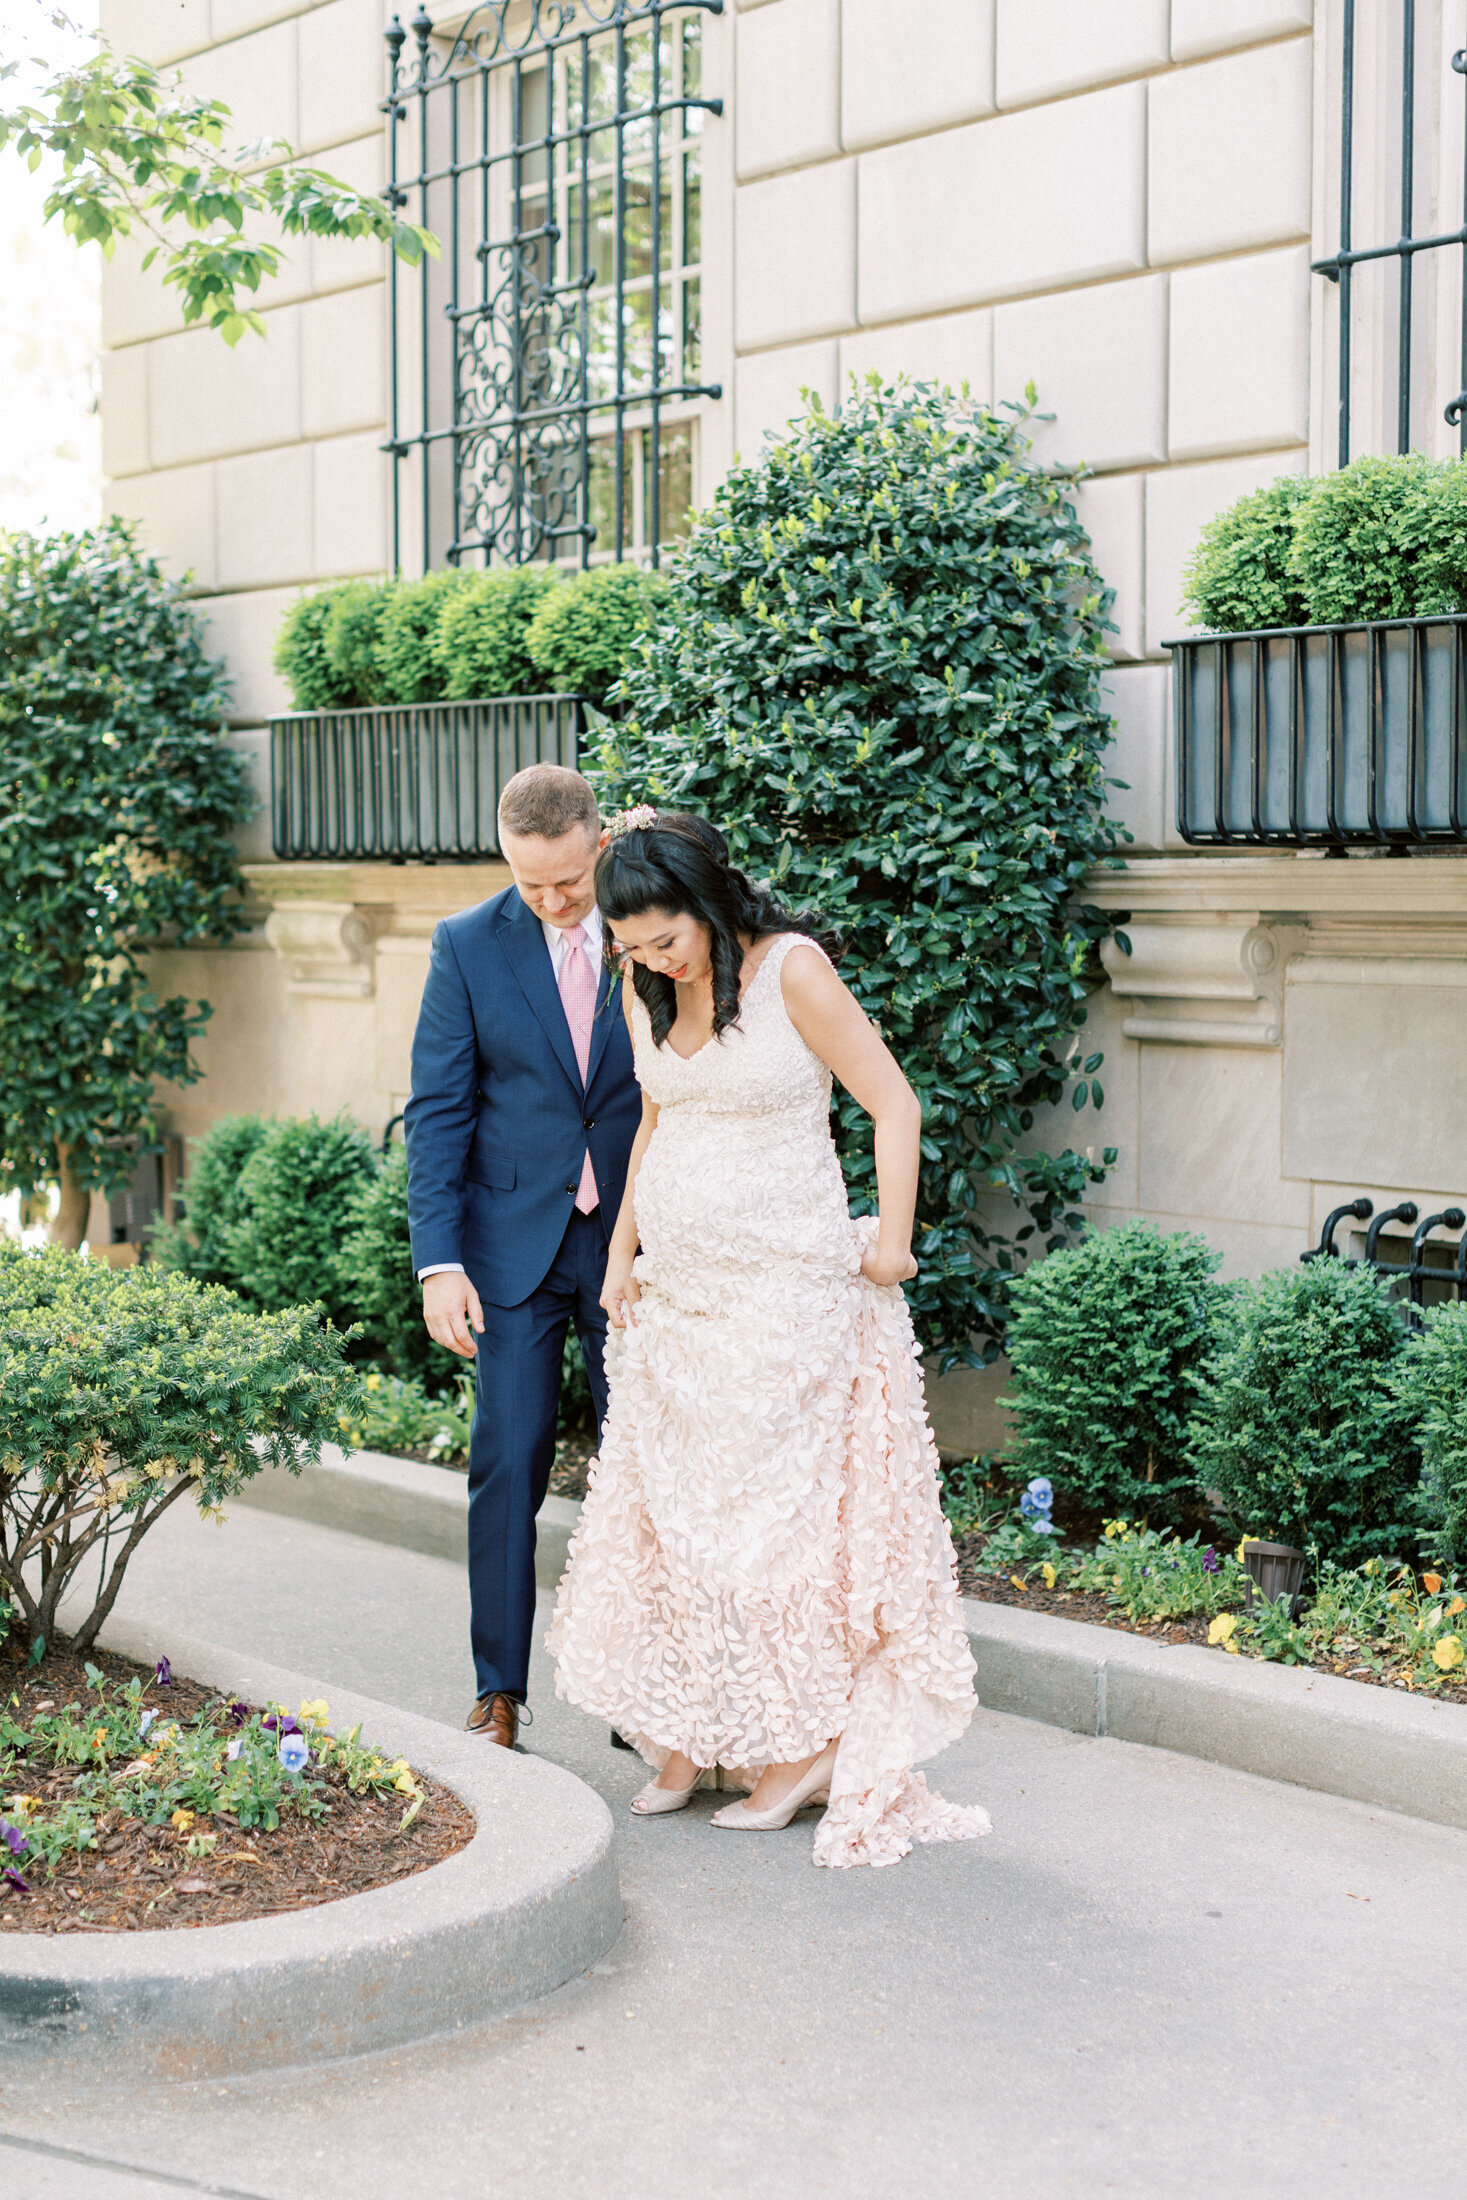 First look between the bride and groom at a DC wedding venue